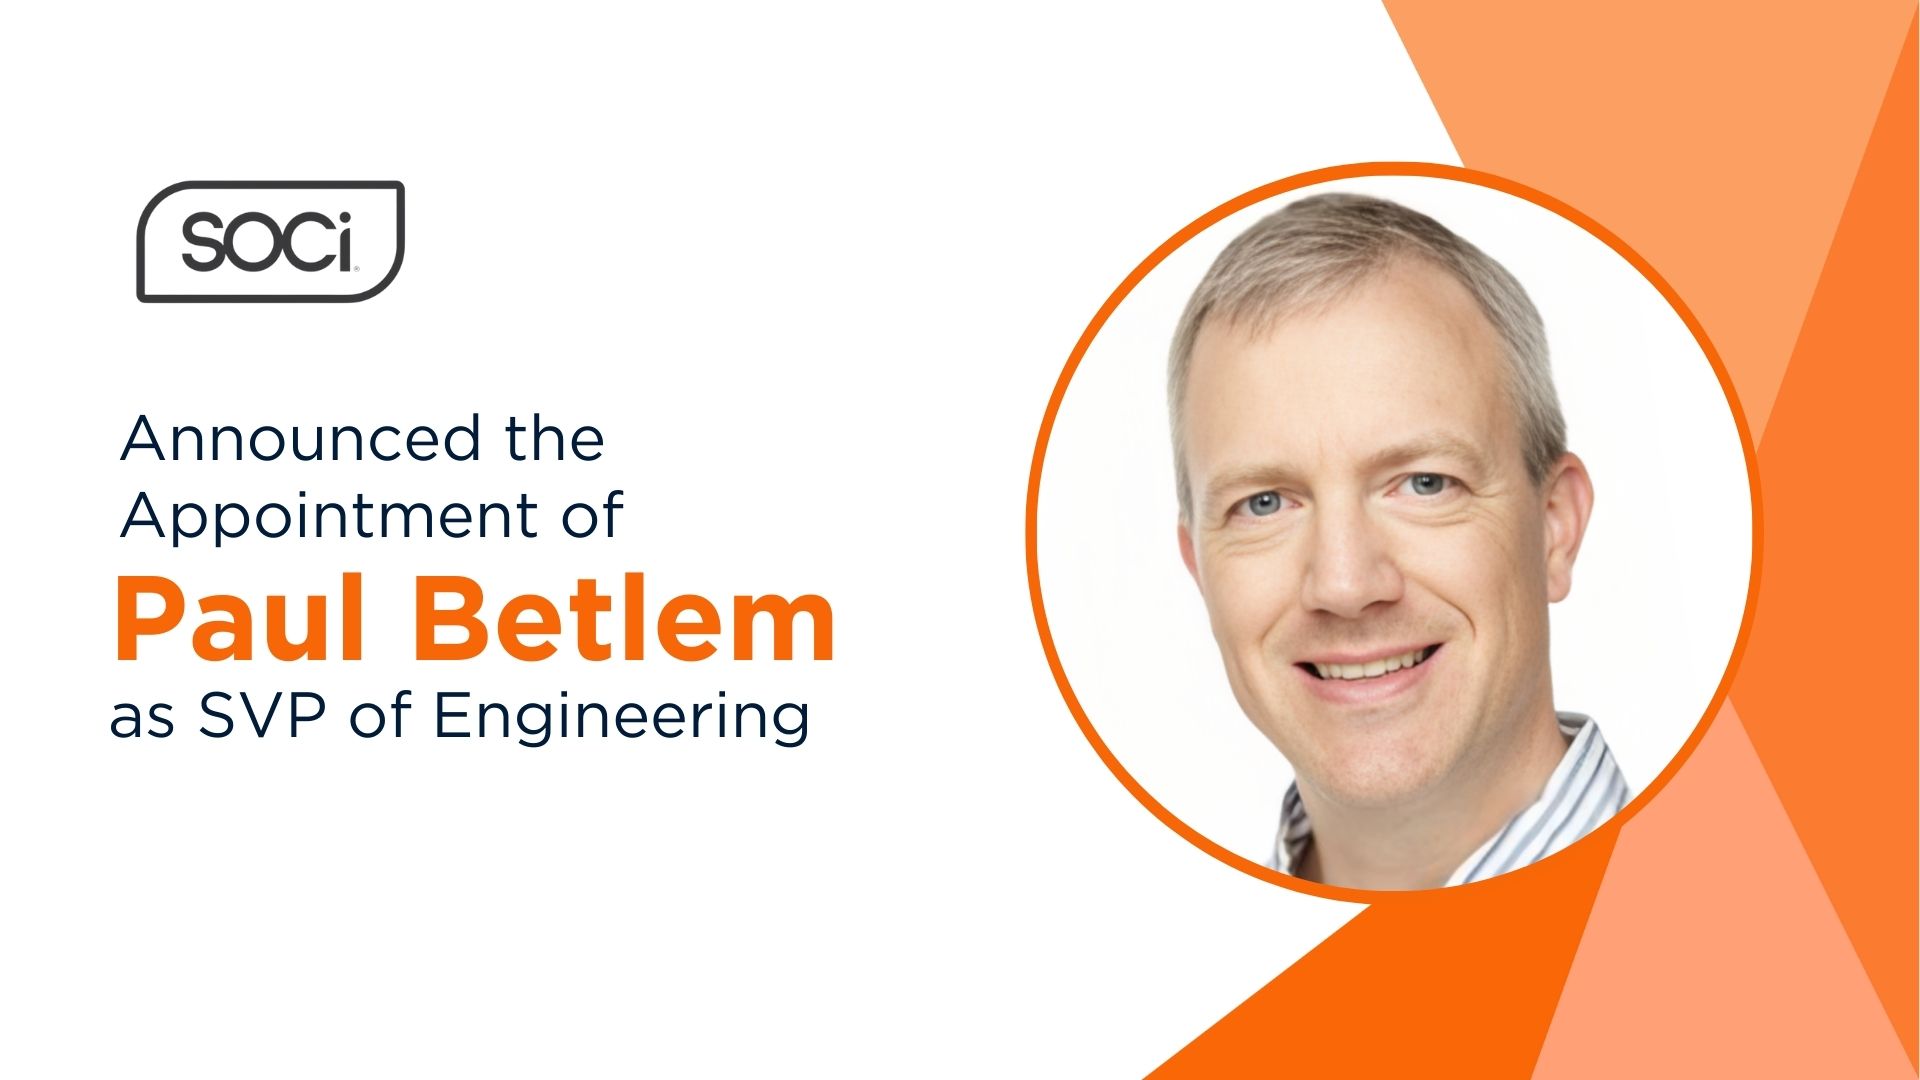 SOCi Welcomes Paul Betlem as Senior Vice President of Engineering, Bolstering AI and Data-Driven Innovation